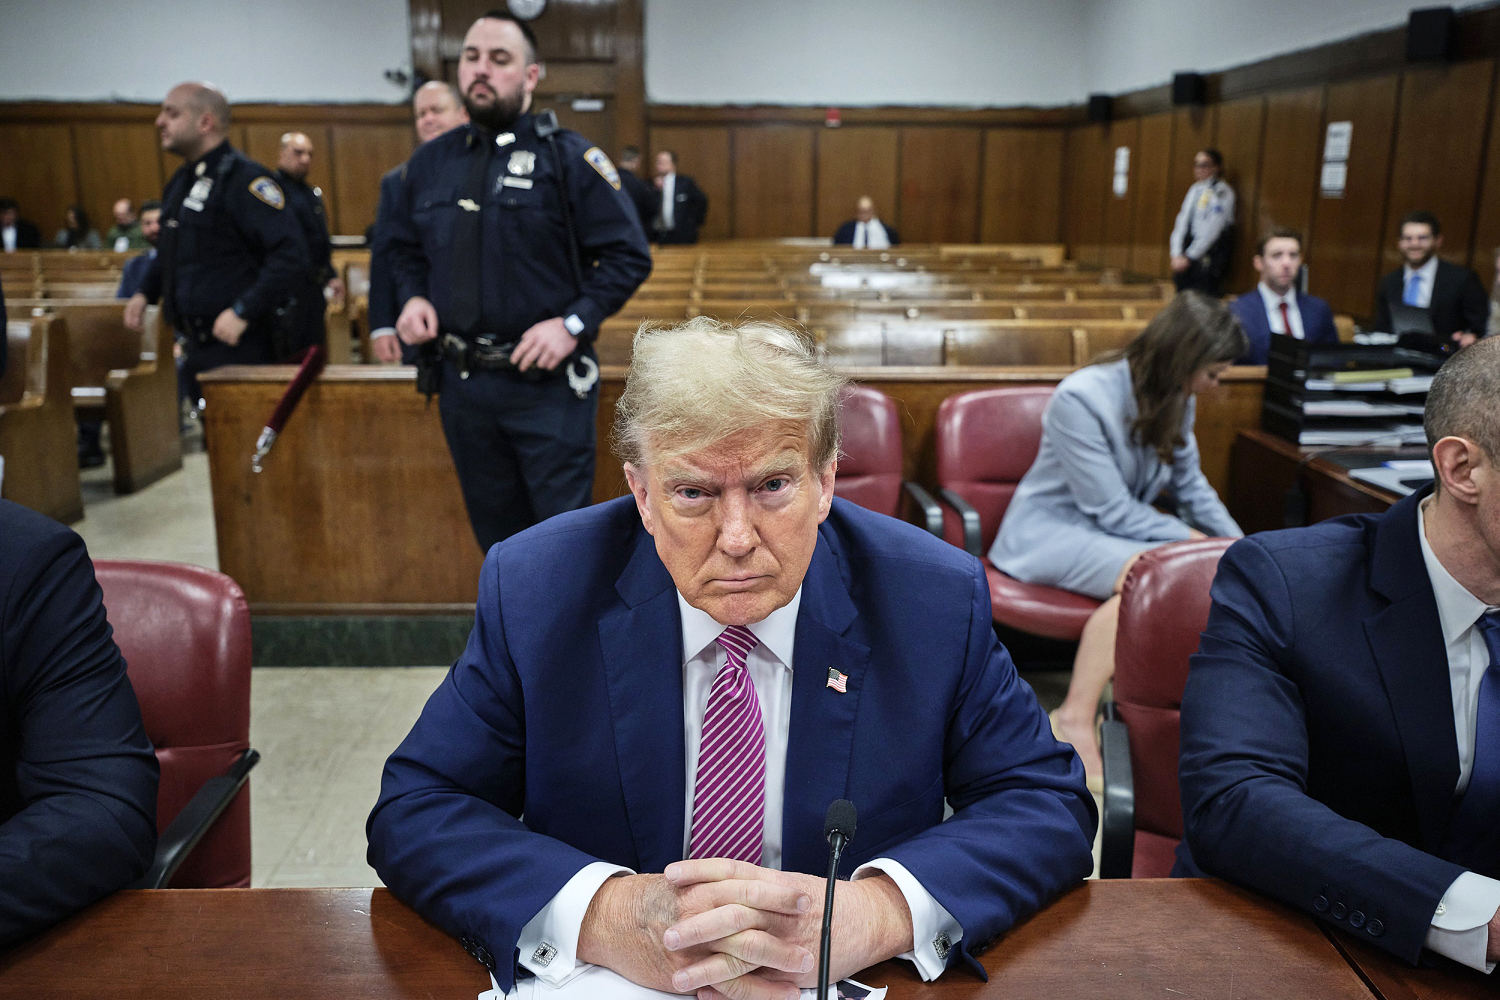 From stare-downs to shut-eye: Trump’s every move in criminal trial under the microscope 